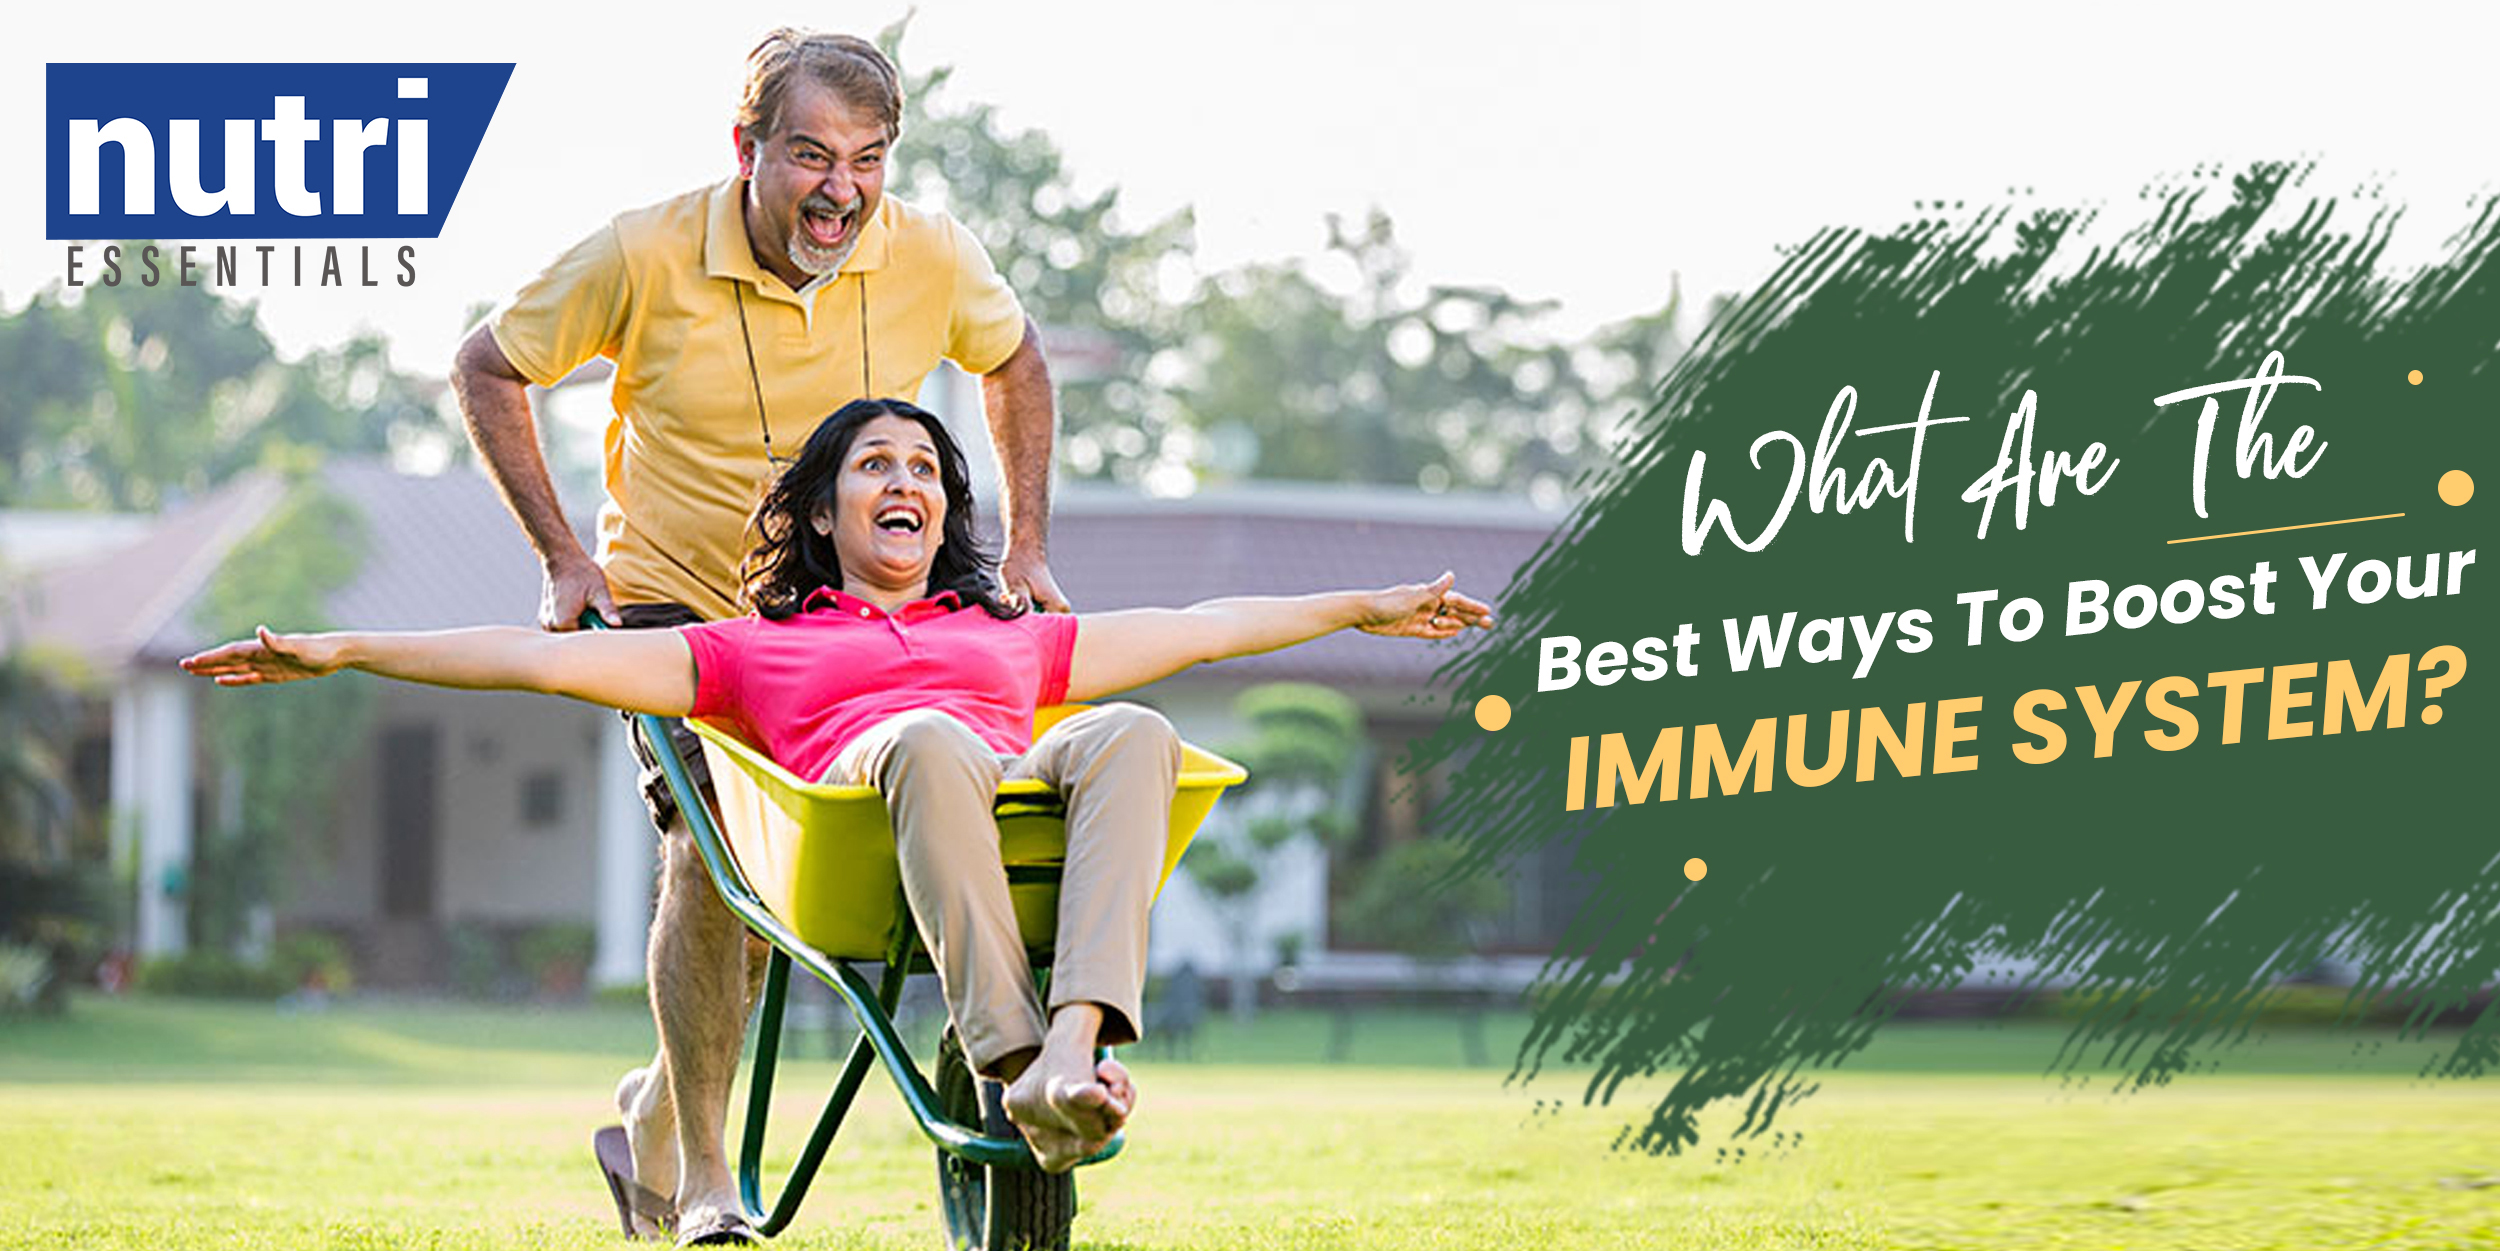 What Are the Best Ways to Boost Your Immune System?